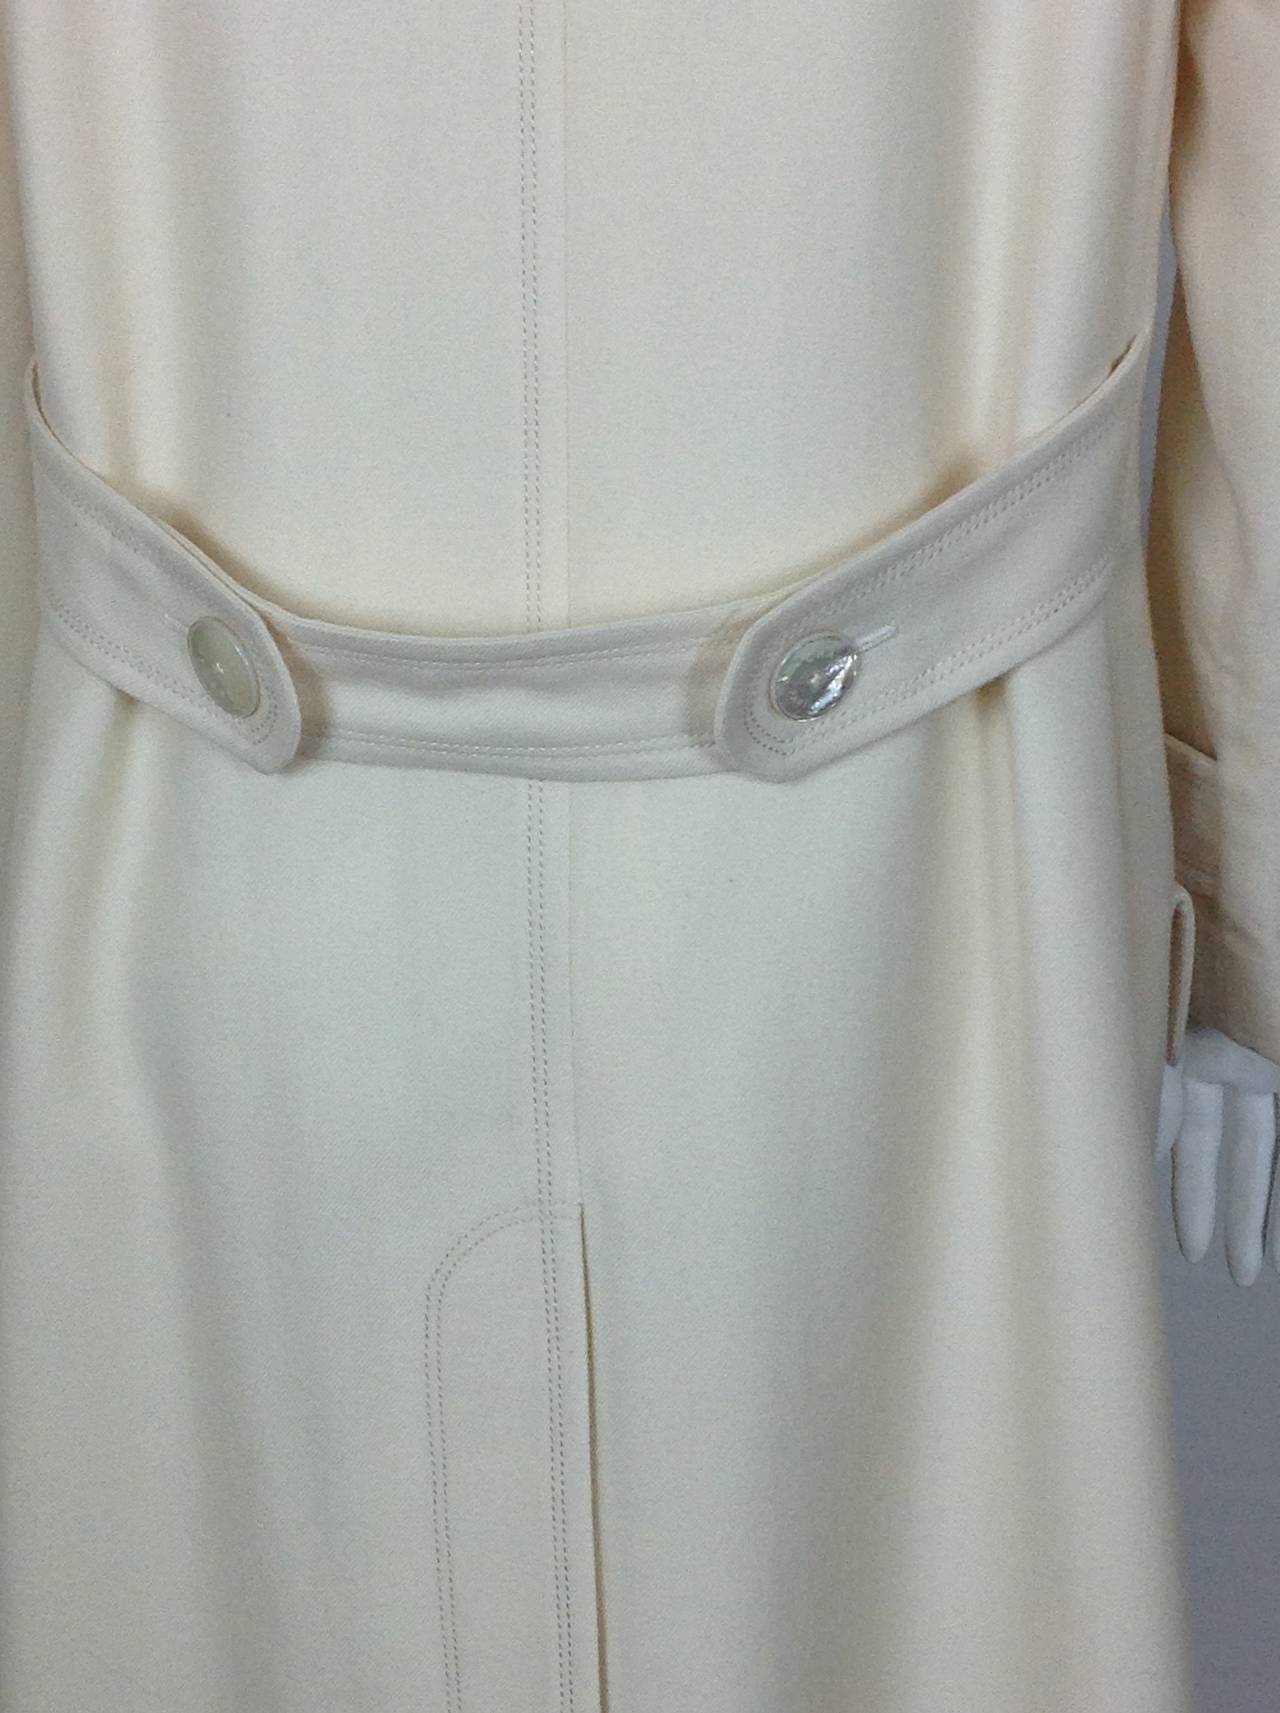 Chanel lightweight wool DB Trench coat                 Size 34 In Excellent Condition For Sale In Palm Beach, FL